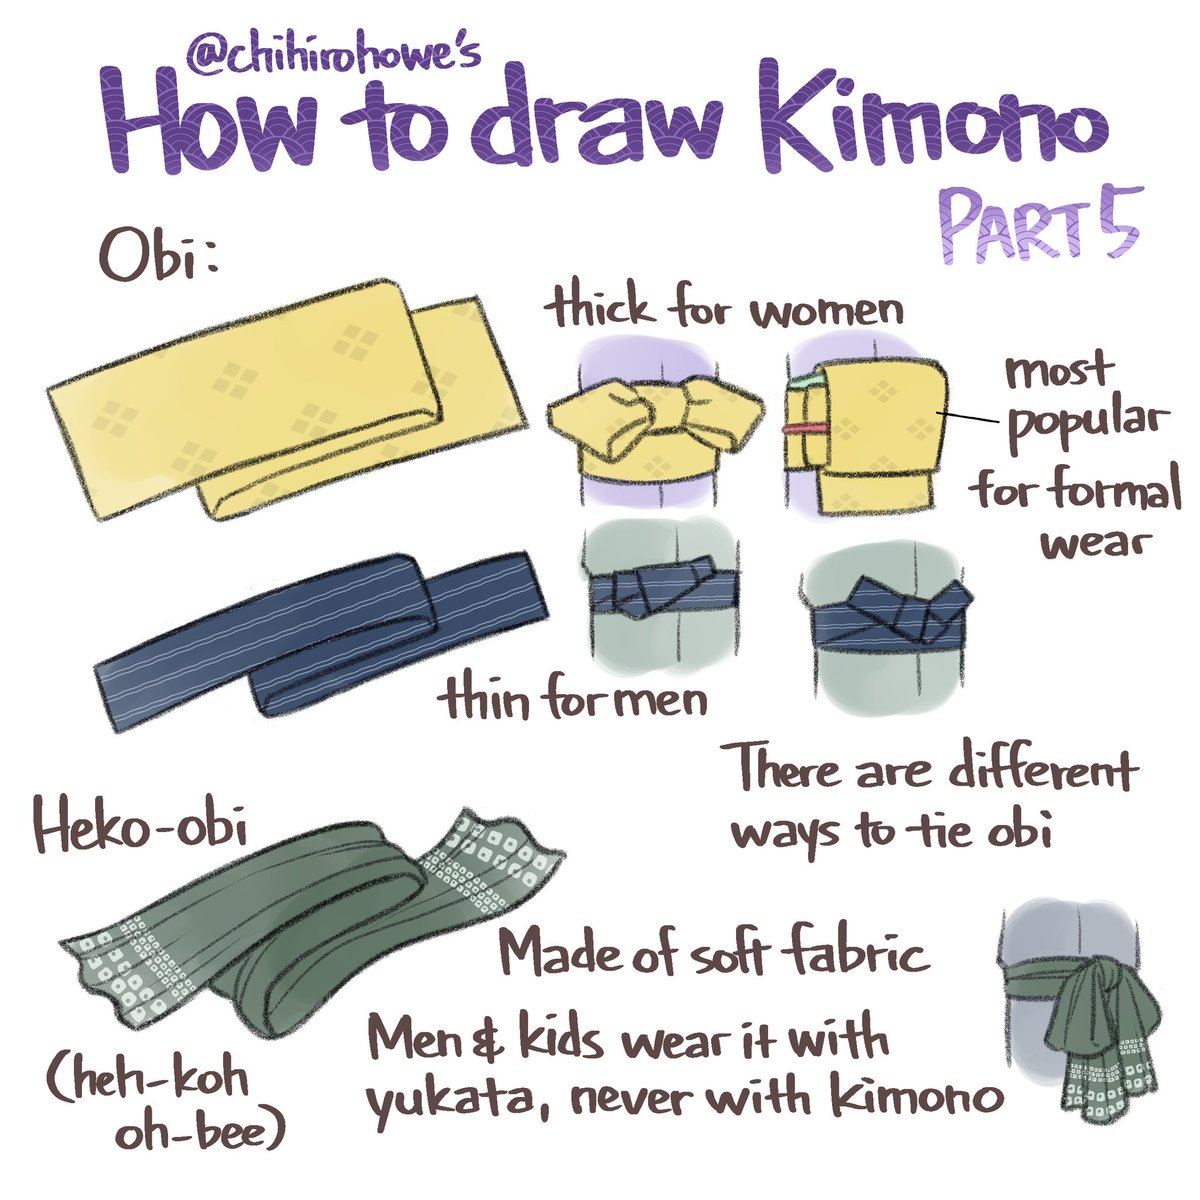  #kimono Part 5: ObiObi is kind of like a sash that holds the kimono together.There are many different colors and patterns.There are also different ways to tie an obi. Some are appropriate for formal occasions, and some are more for celebrations.